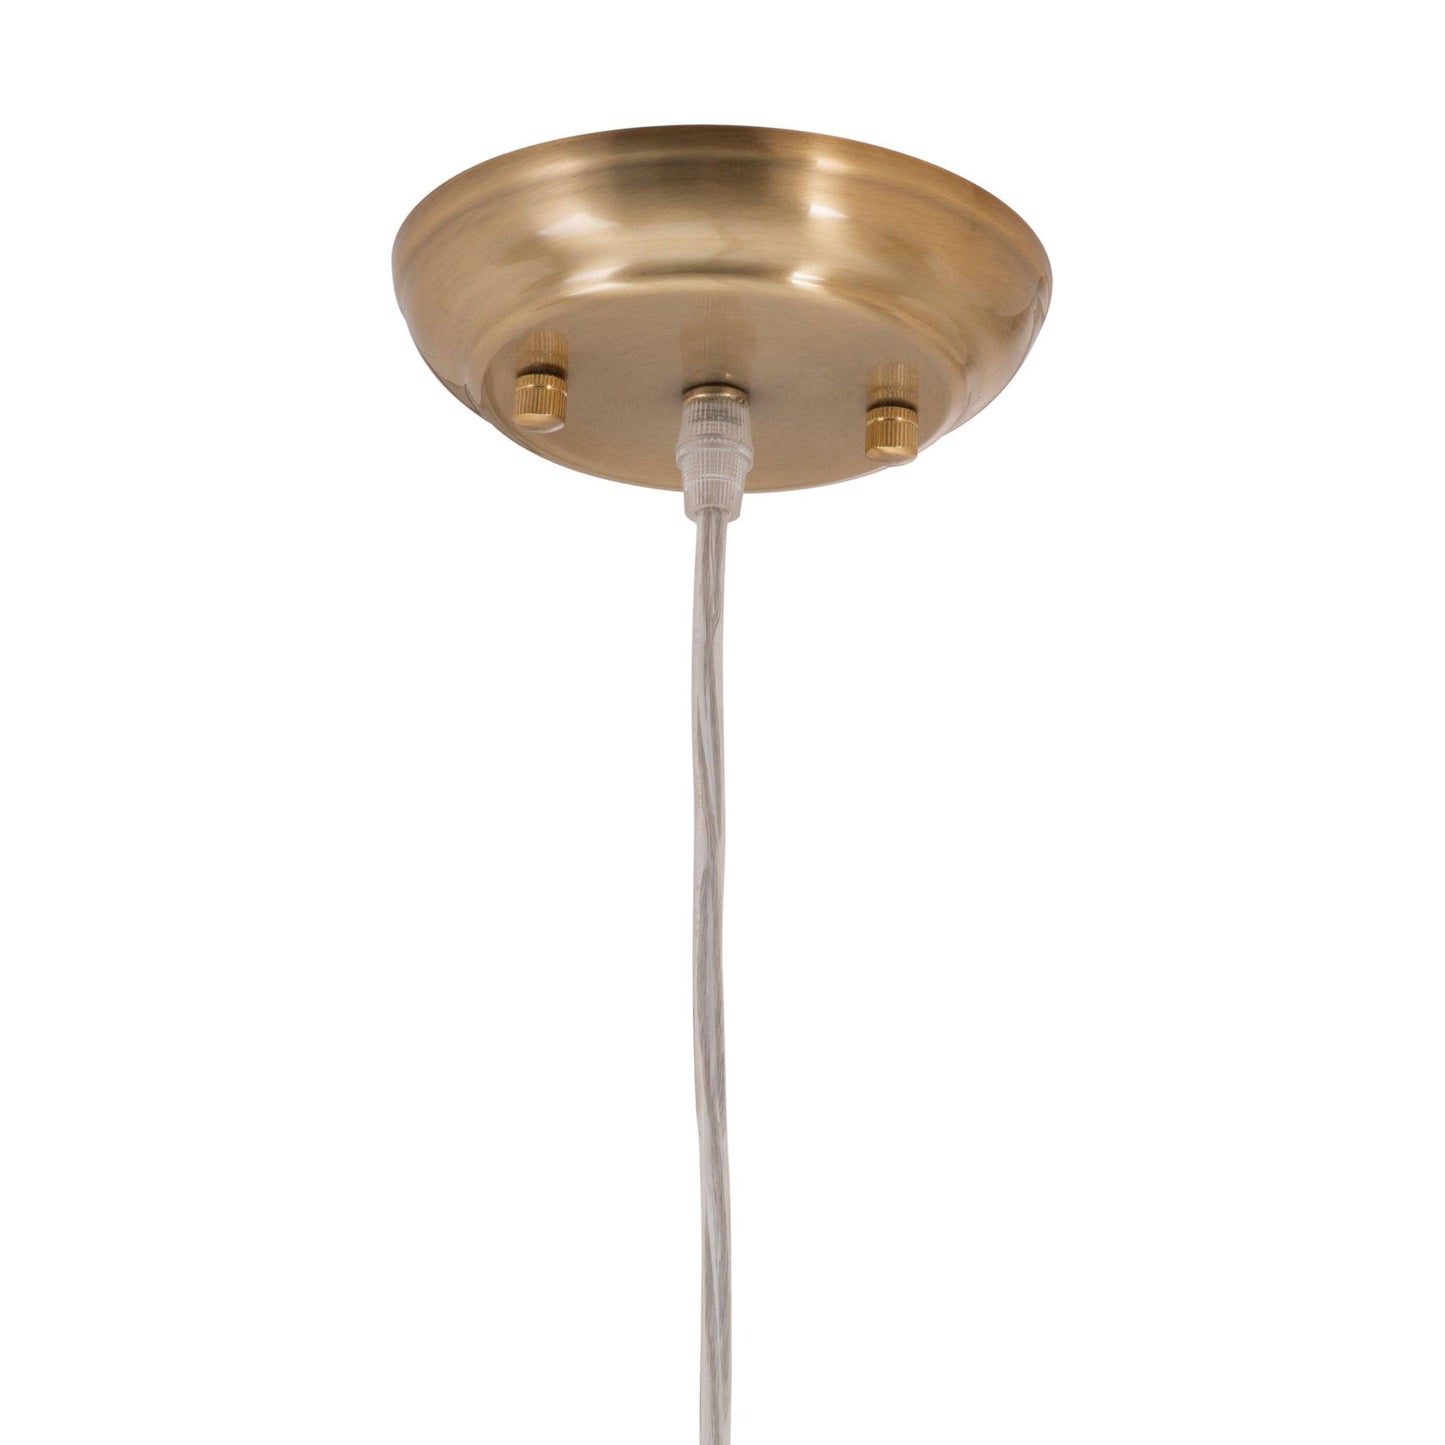 Golden Lighting Pendant enny Ceiling Lamp Gold - Sideboards and Things Brand_Zuo Modern, Color_Gold, Depth_0-10, Finish_Polished, Materials_Glass, Materials_Metal, Metal Type_Steel, Product Type_Pendant, Width_0-10